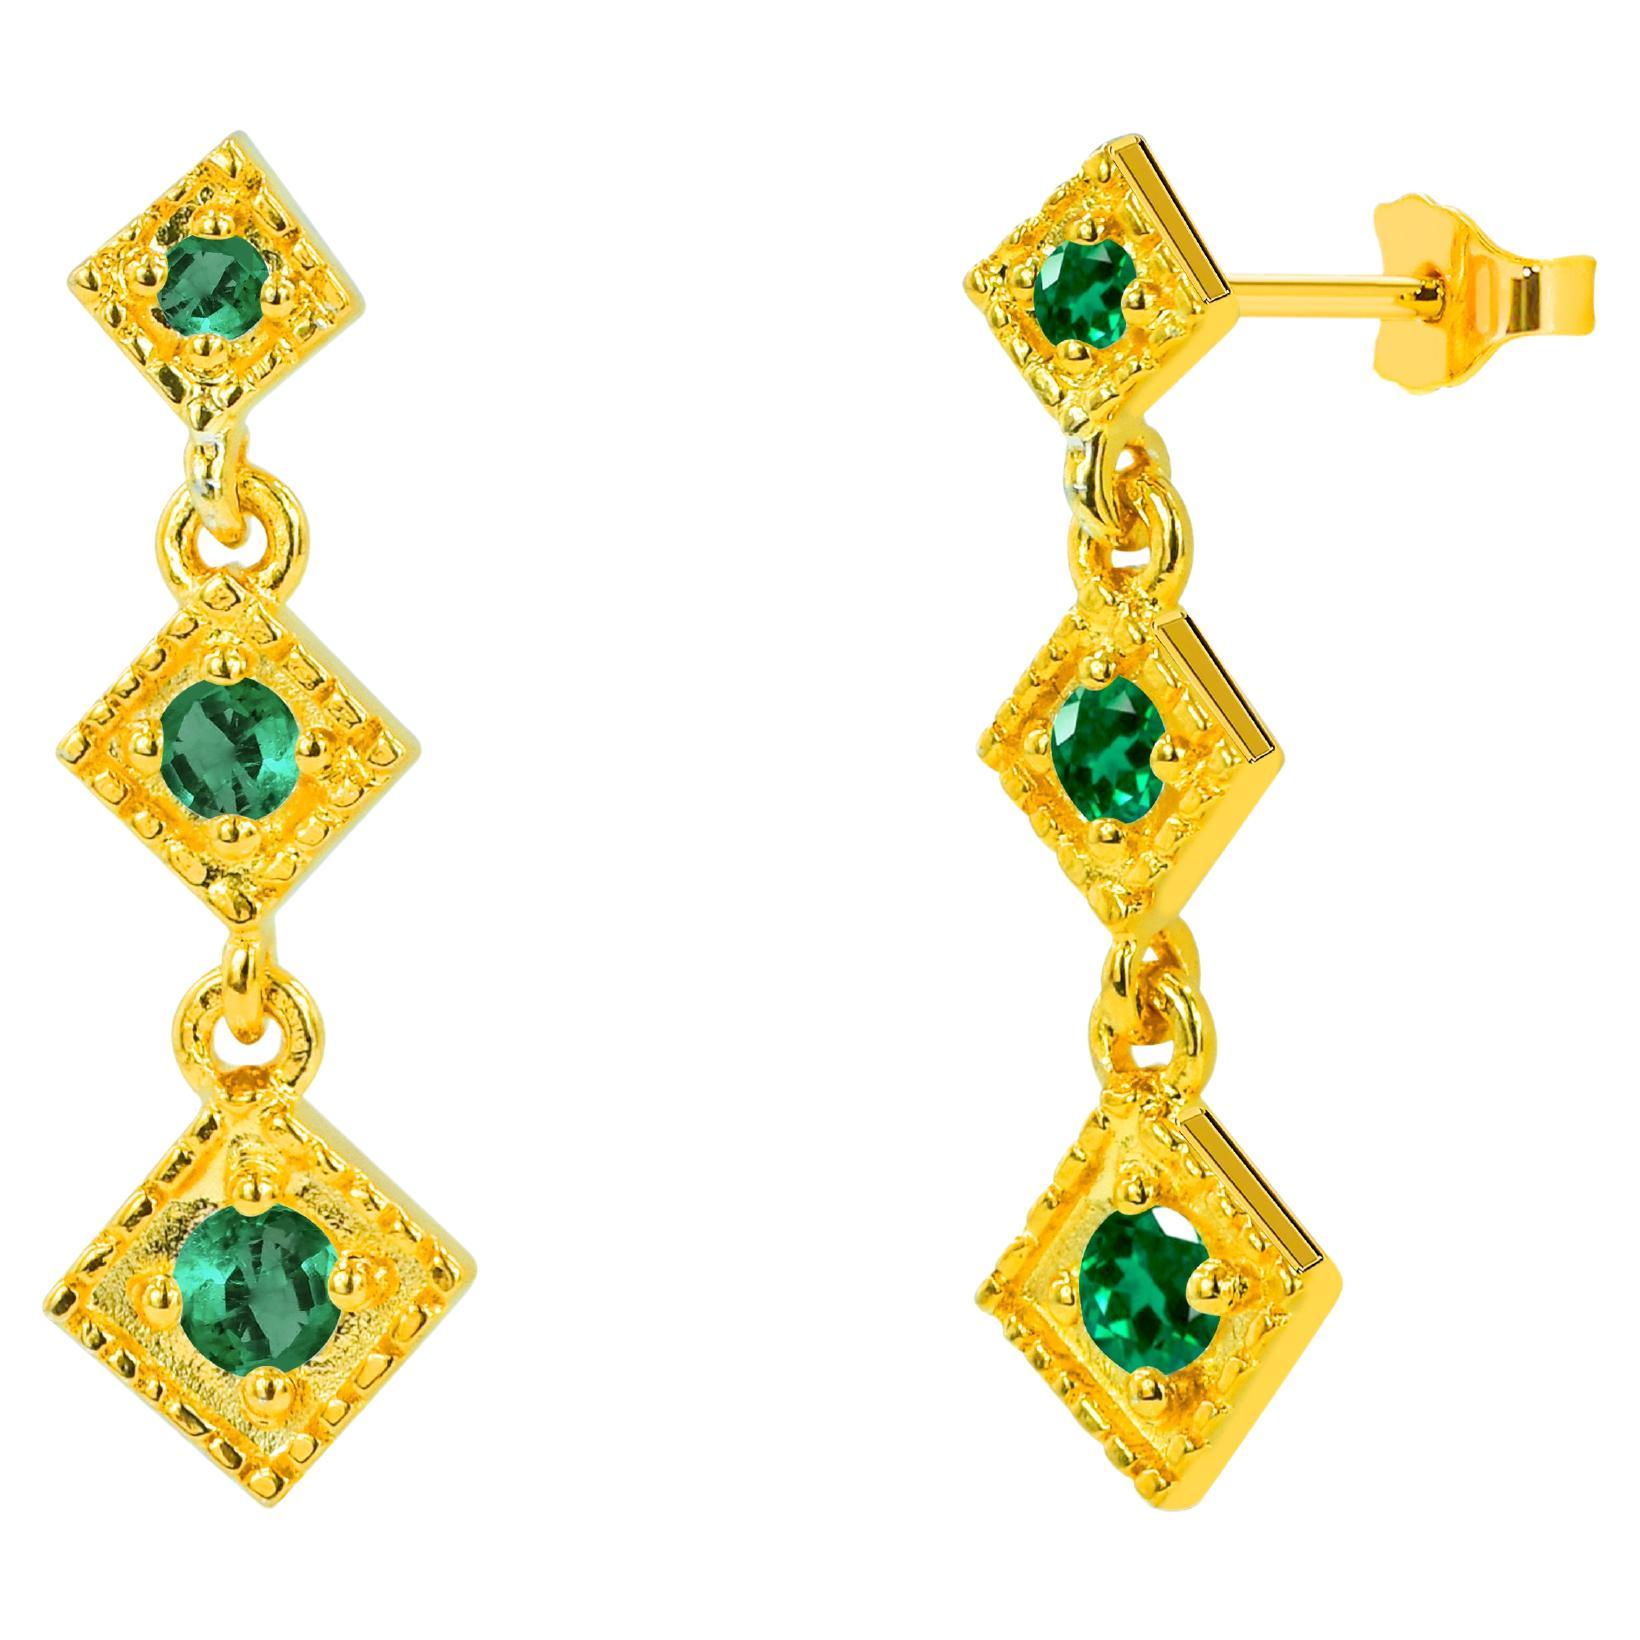 0.09 Ct Stone Emerald, Ruby and Sapphire Studs Earrings in 14K Gold For Sale